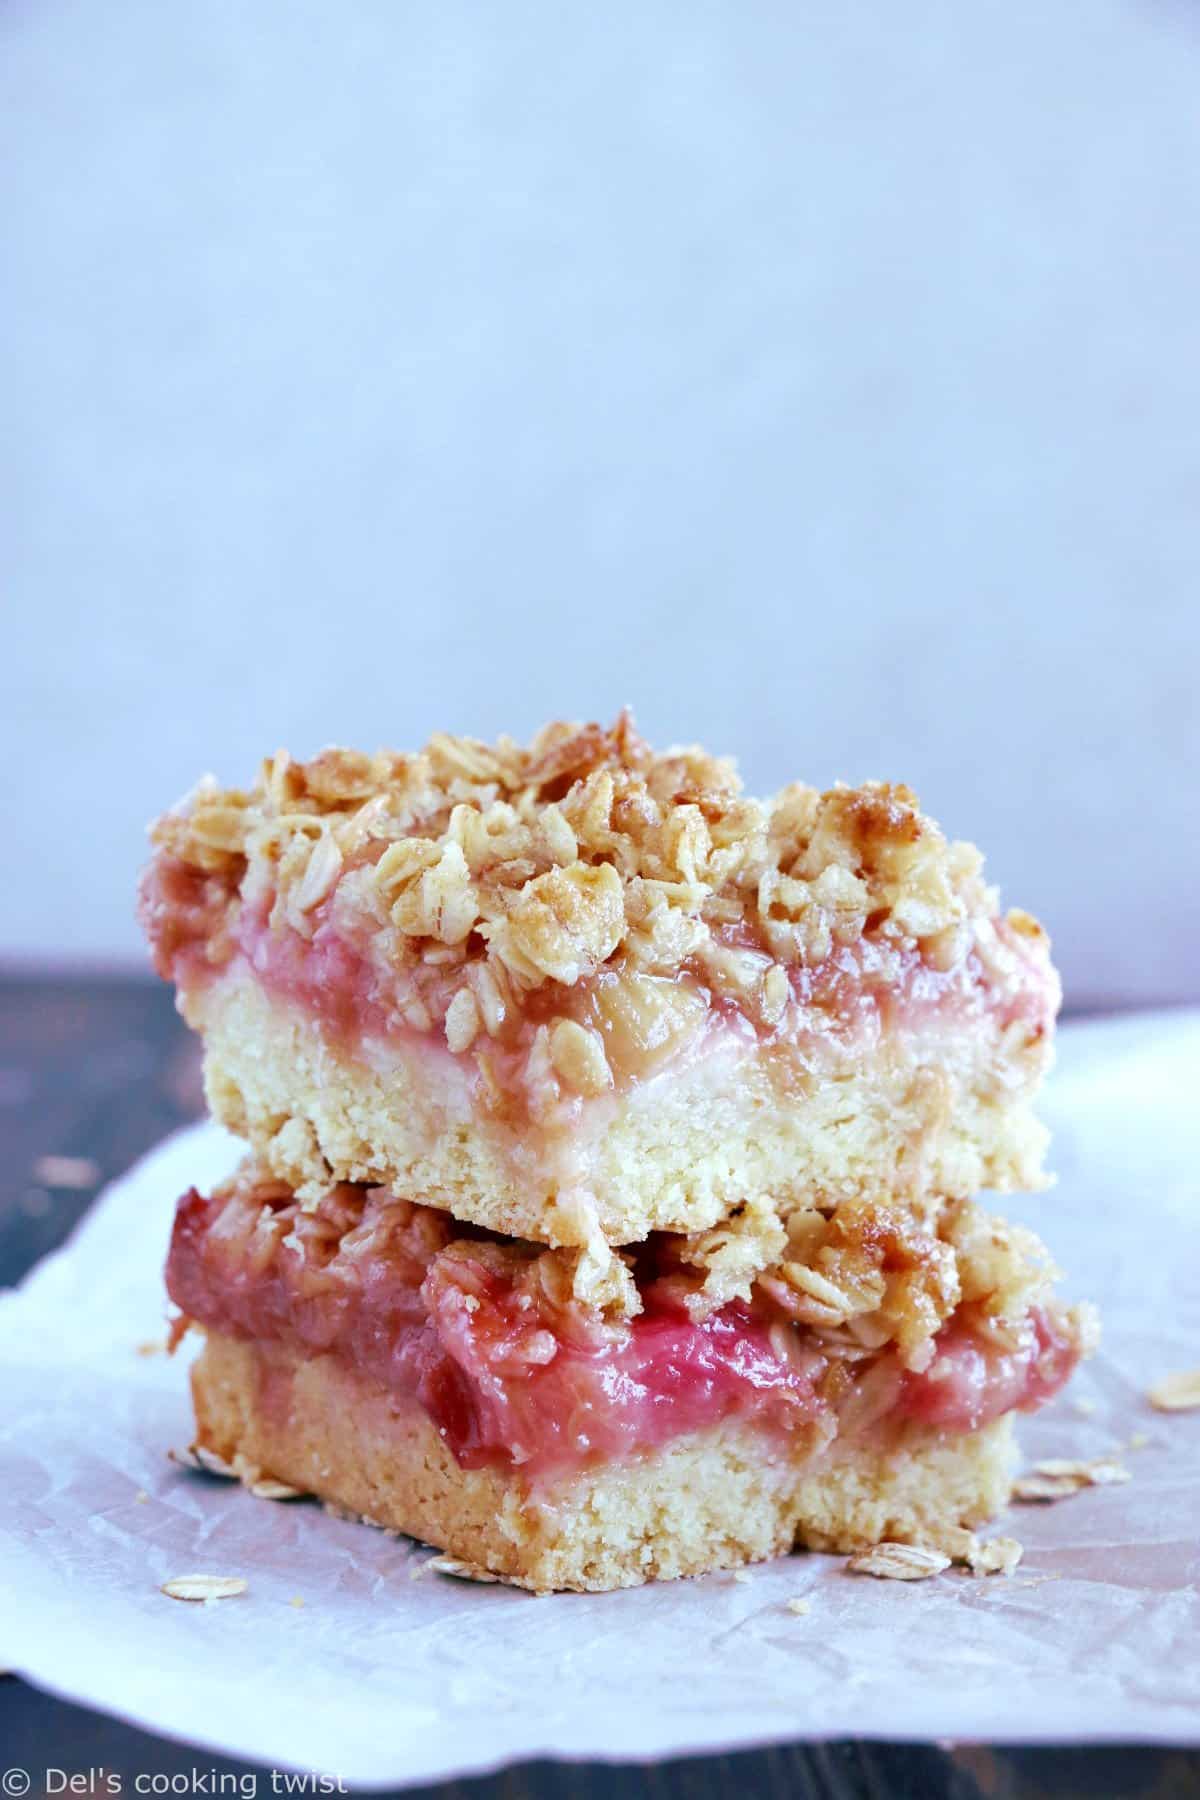 Rhubarb Crumble Bars are a must bake summer dessert recipe. They feature a thick and generous base, a juicy, sweet and tart rhubarb compote, and a crispy oat crumble on top.